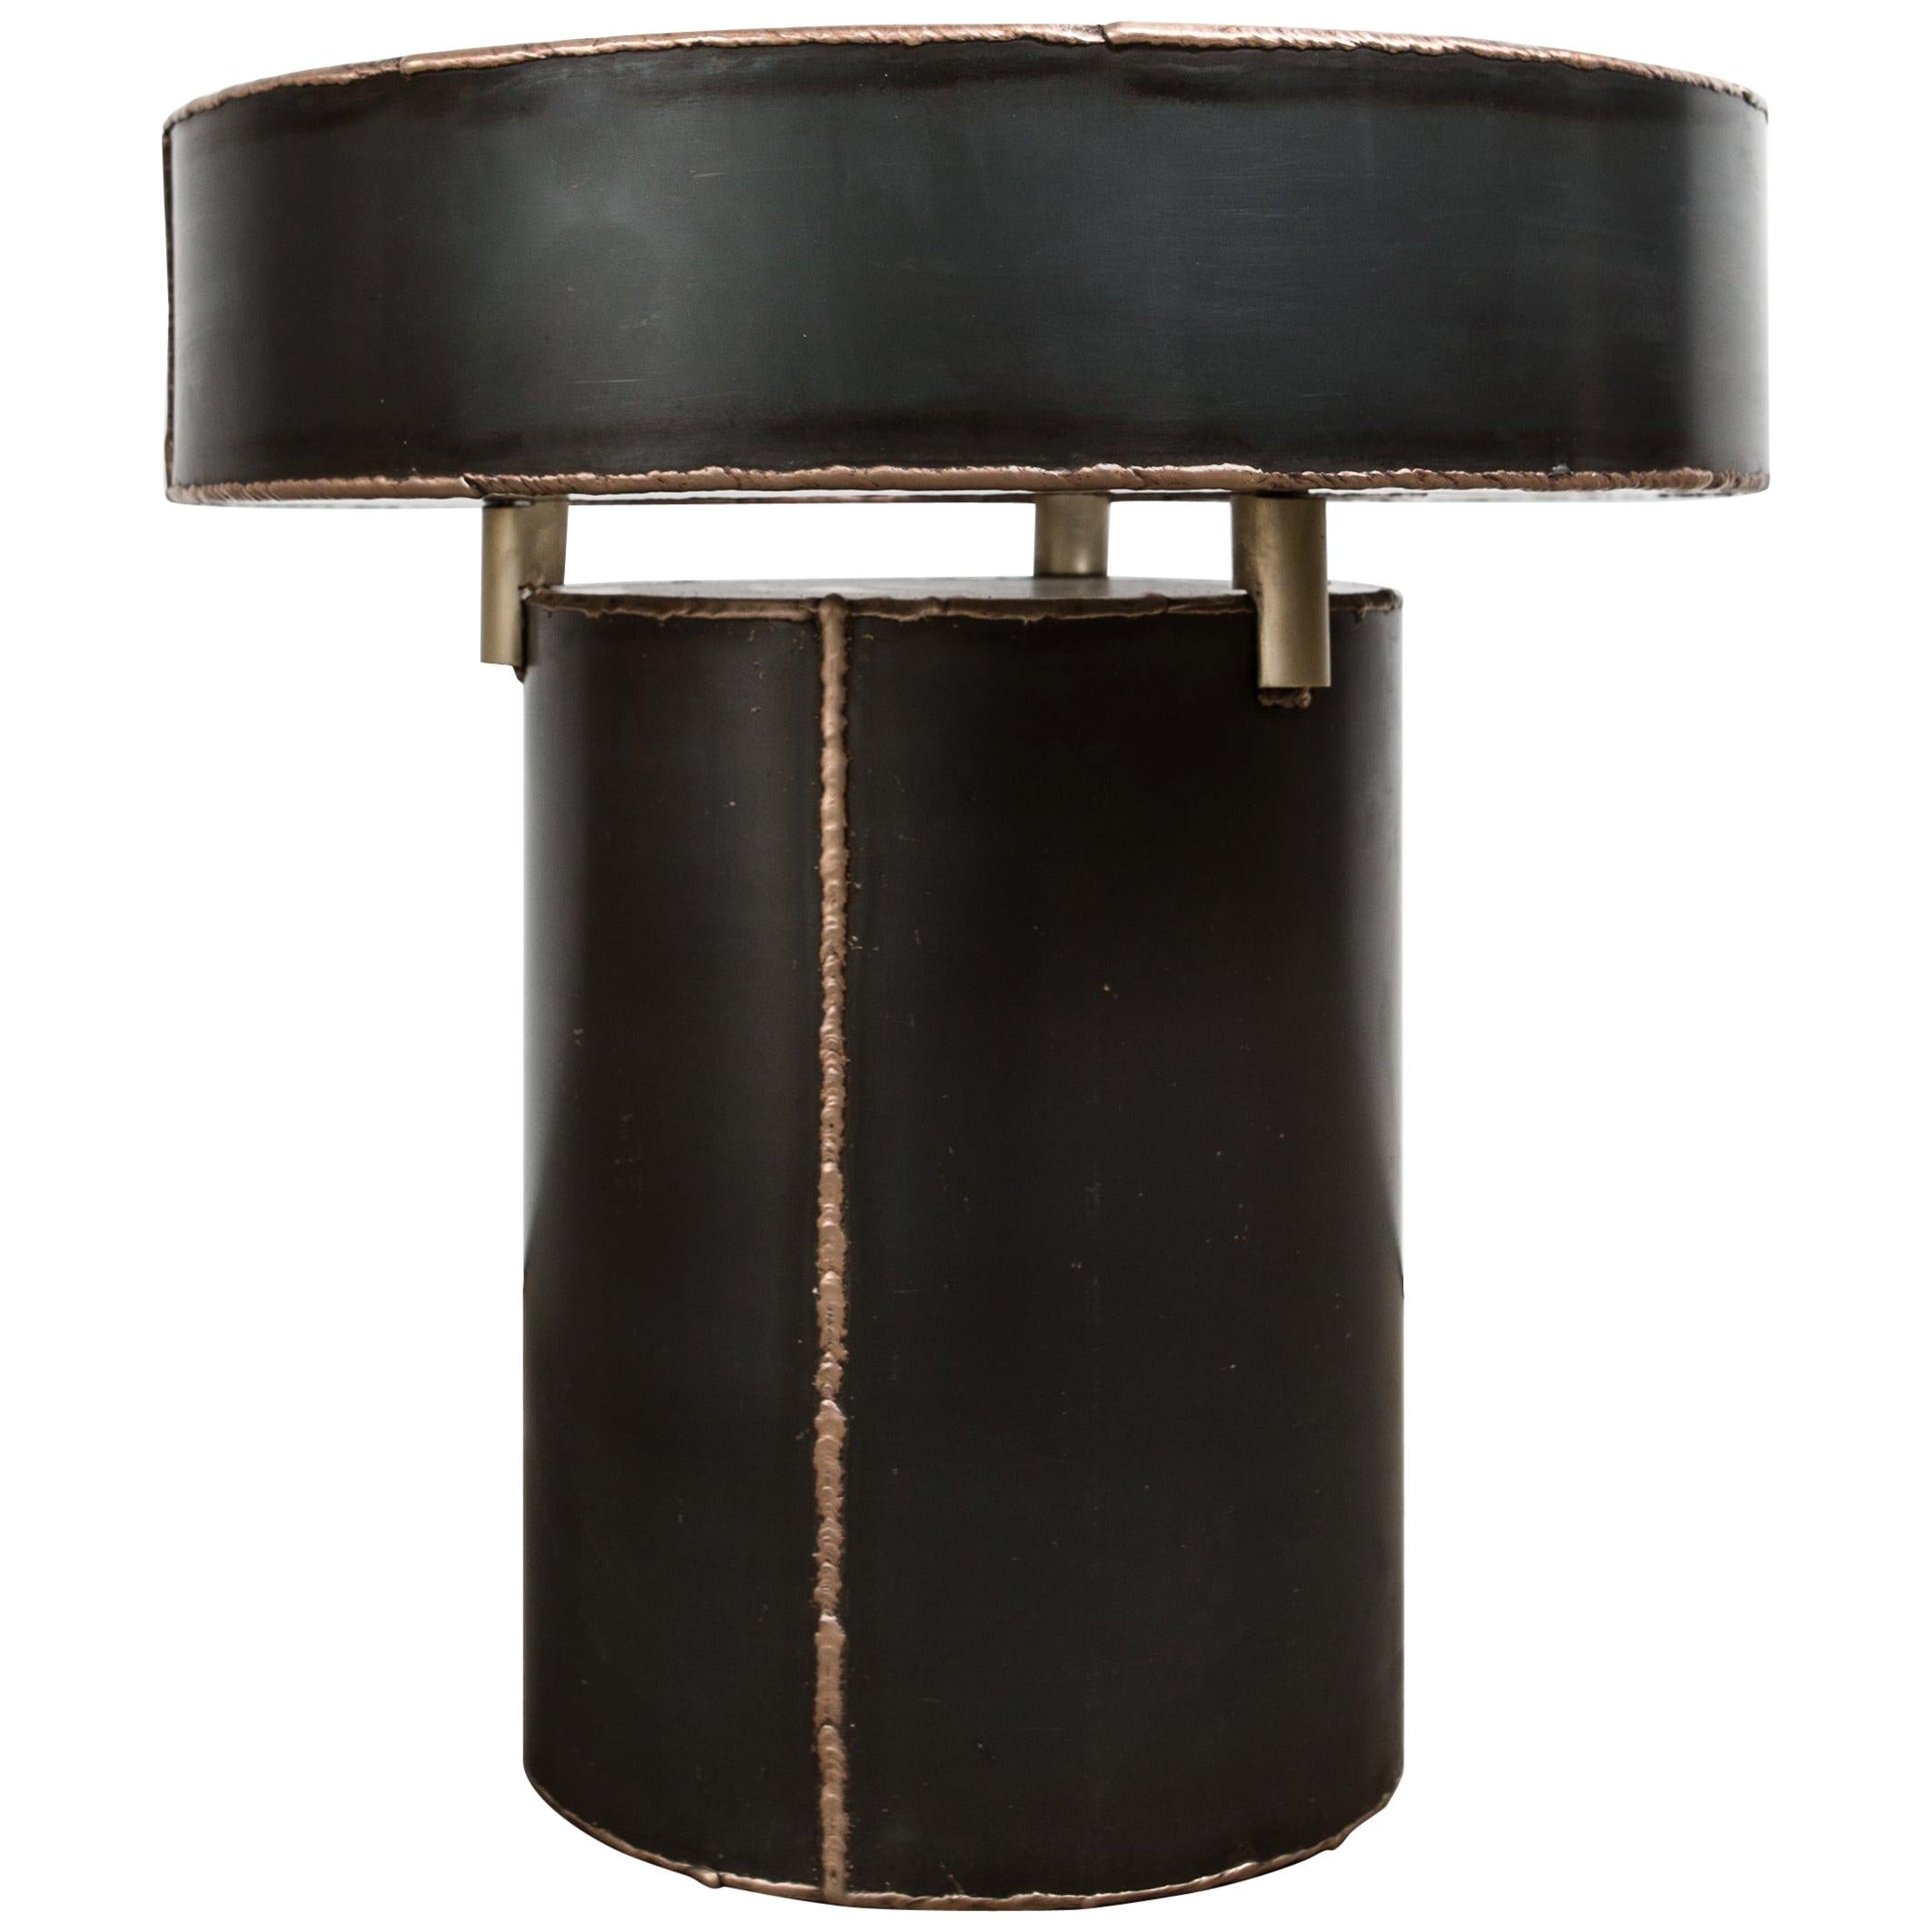 In Stock Sentric Side Table in Raw Black Steel and Bronze Seam, by Mtharu im Angebot